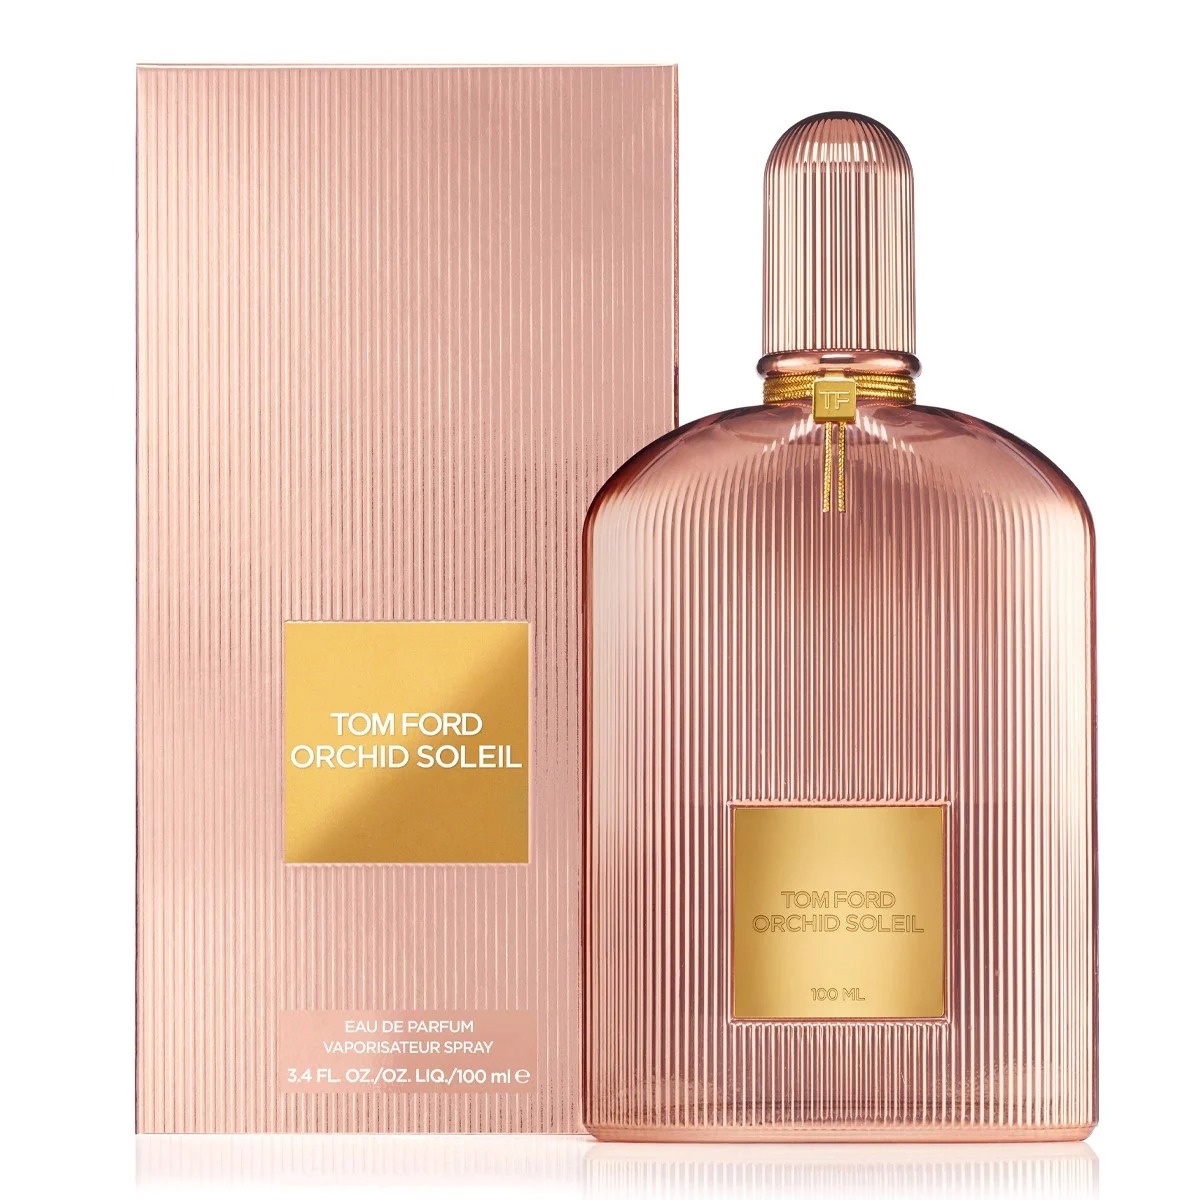 Tom Ford Orchid Soleil 1